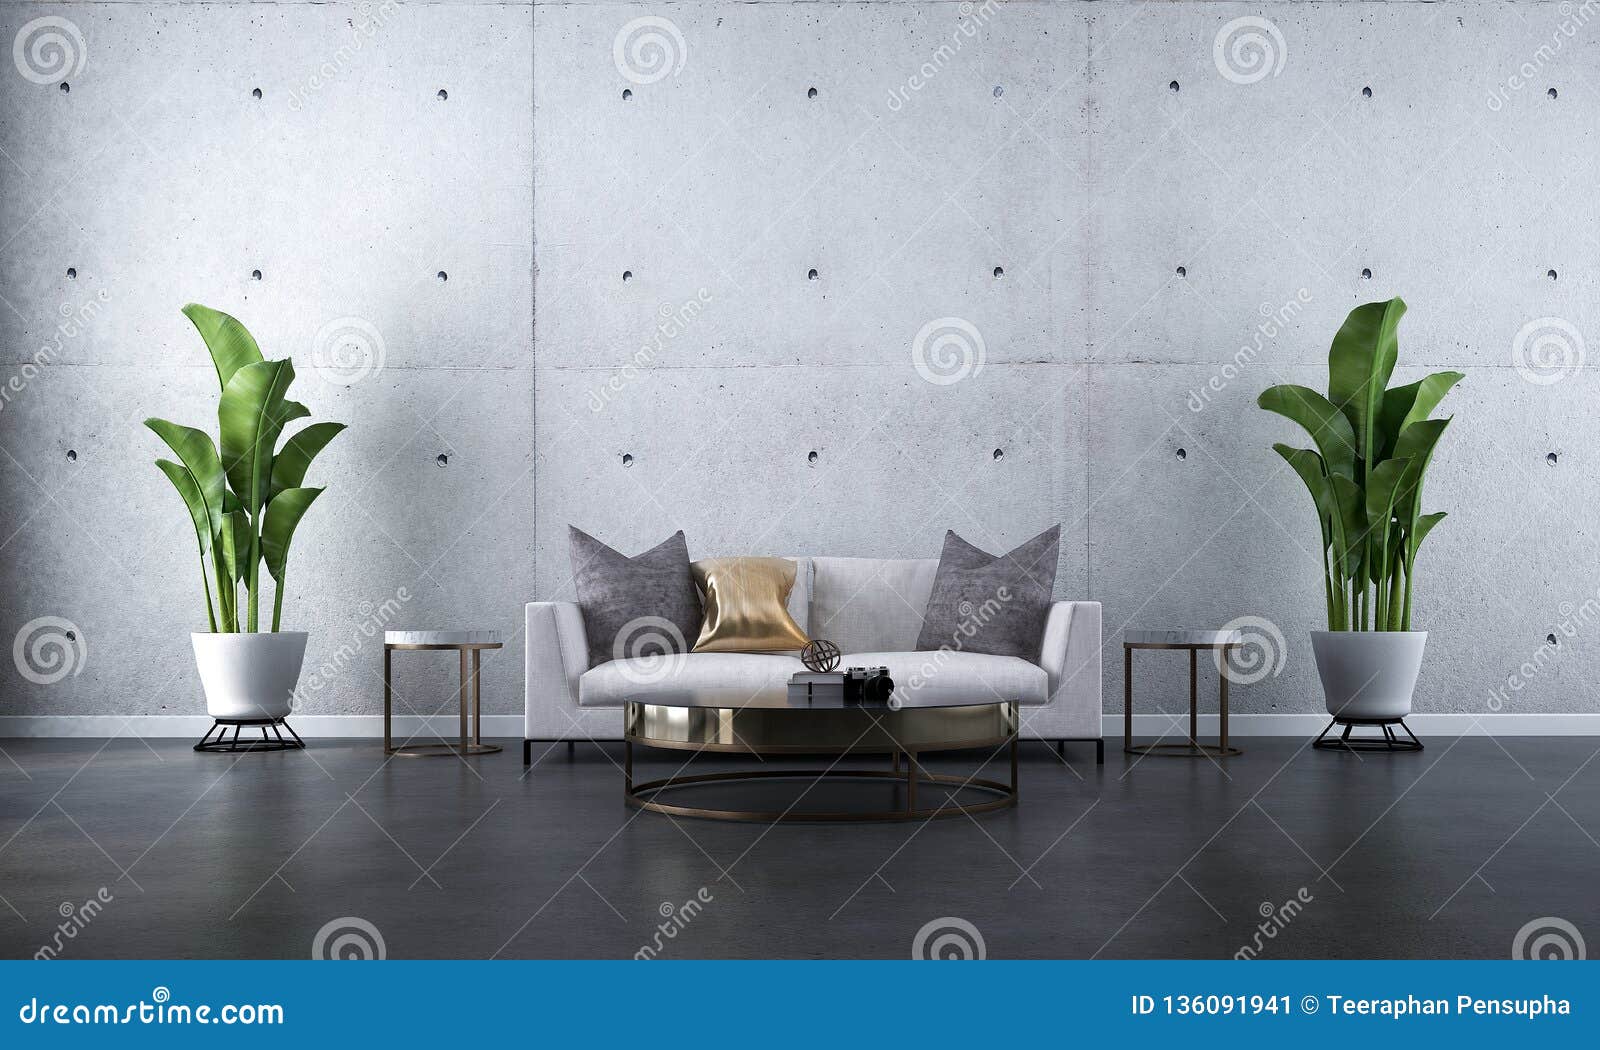 The Interior Design Concept of Modern Minimal Living Room and Concrete  Texture Wall Background Stock Image - Image of pattern, house: 136091941